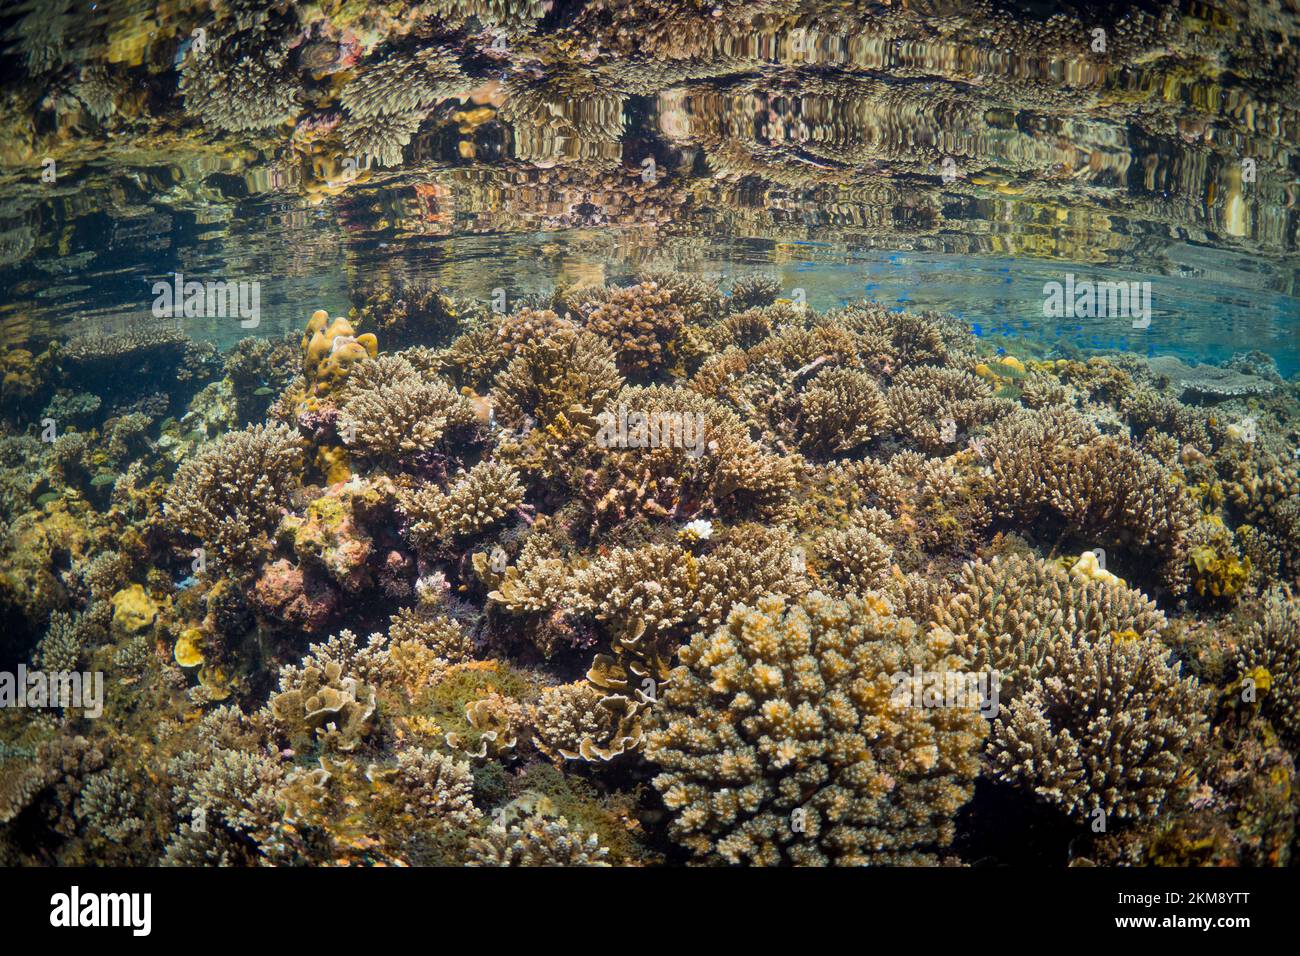 Super healthy hard coral reef in the Indo Pacific, busting with biodiversity and many marine species Stock Photo